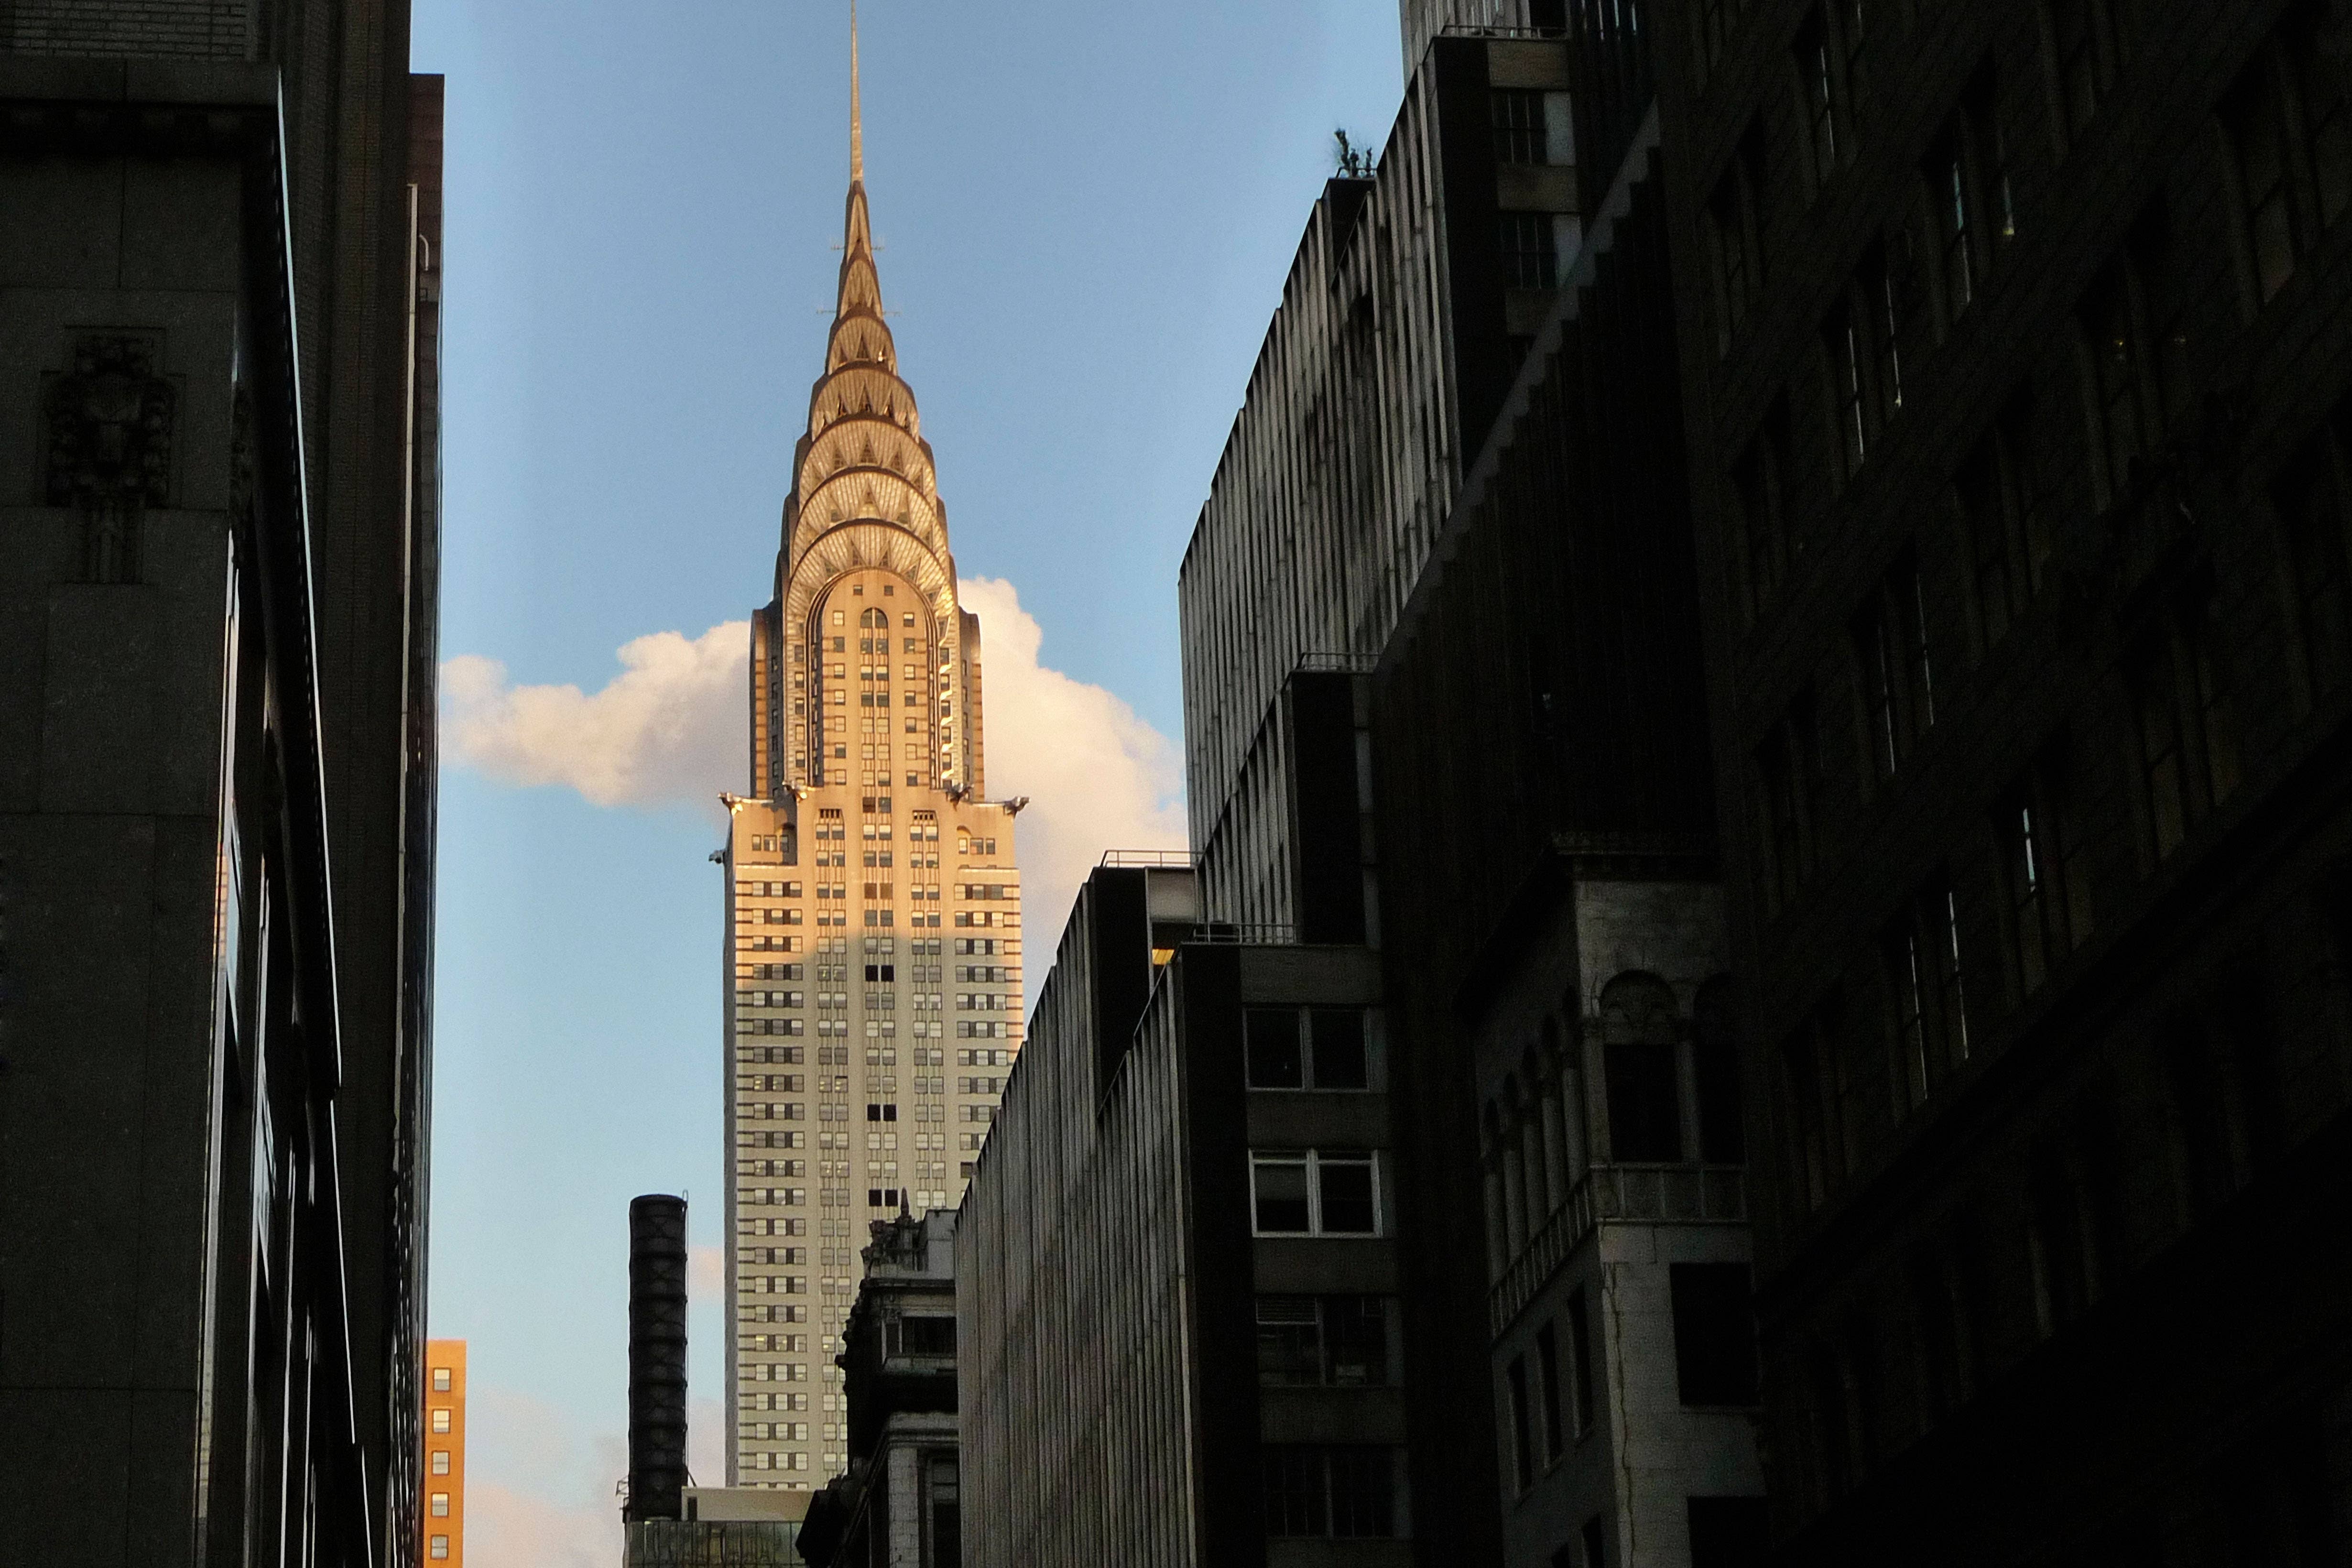 According to financial and media agency Bloomberg, Michael Fuchs owns the Chrysler Building in New York City (Brownstock/Alamy/PA)